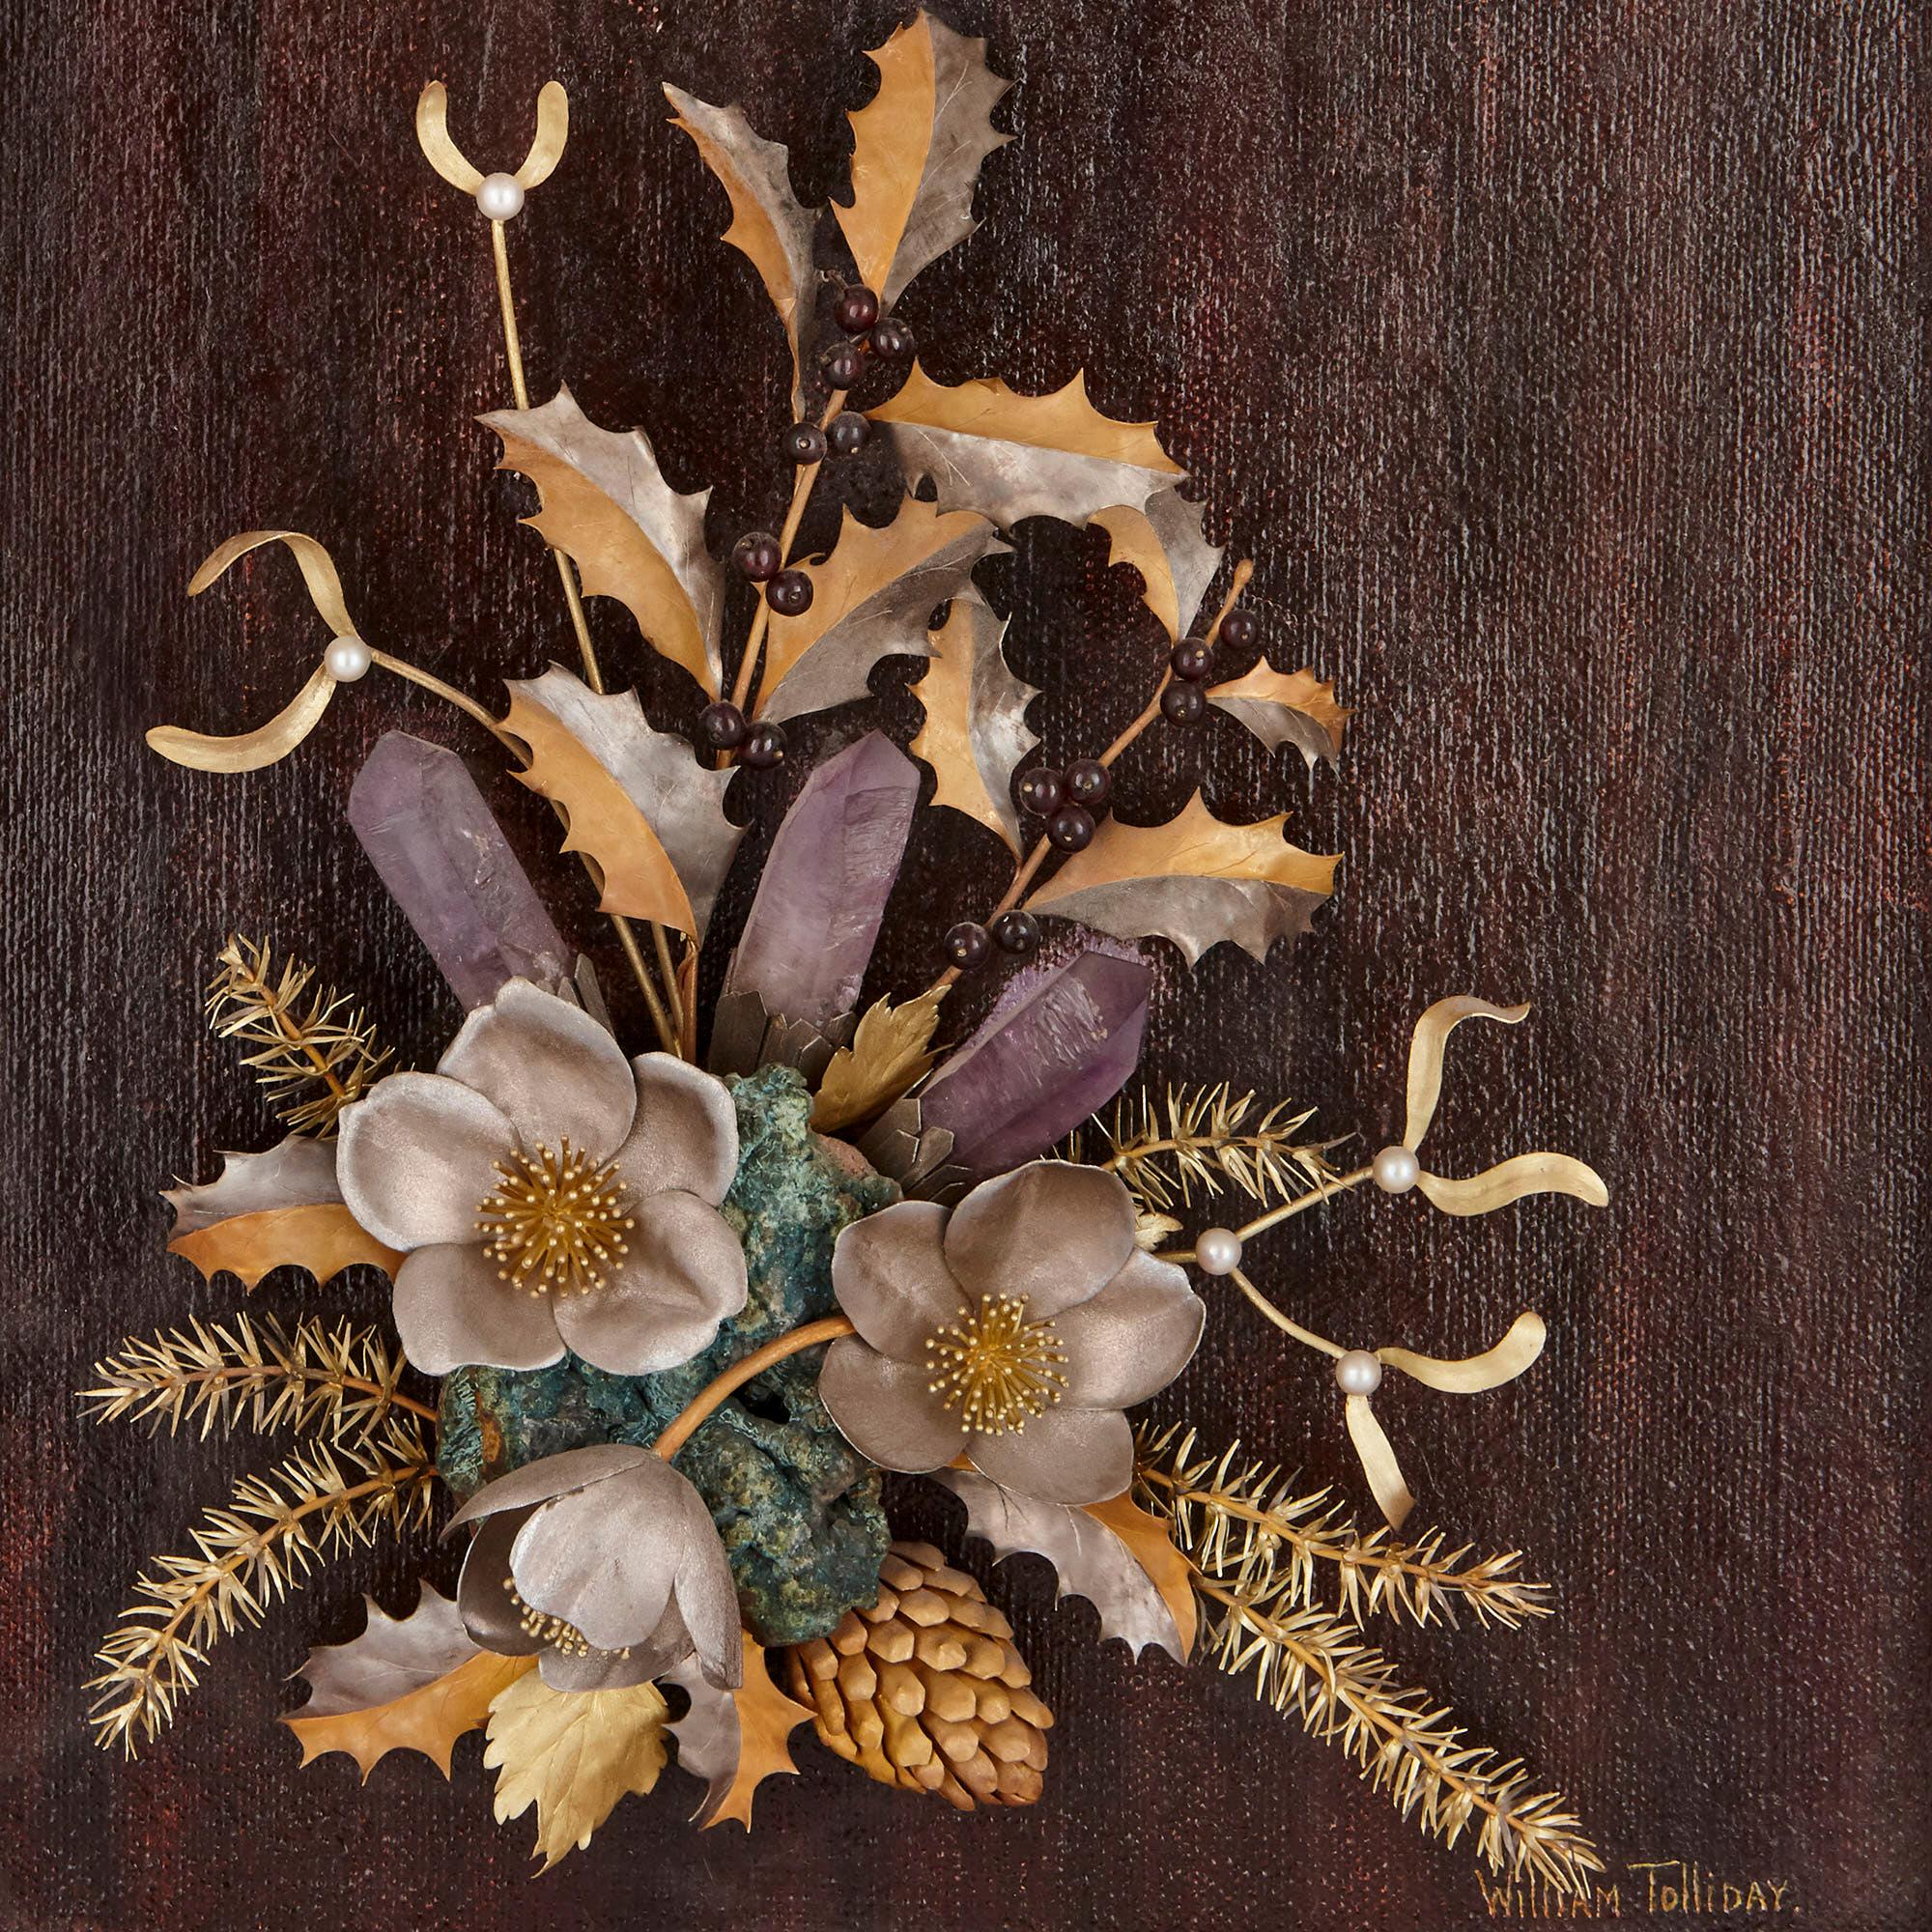 This magnificent study of flowers is wrought from gold and silver, amethyst and other minerals, and natural pearls. The study features sprigs of Holly with mineral berries and gold leaves springing from a green stone crop of rock. Grasses, also